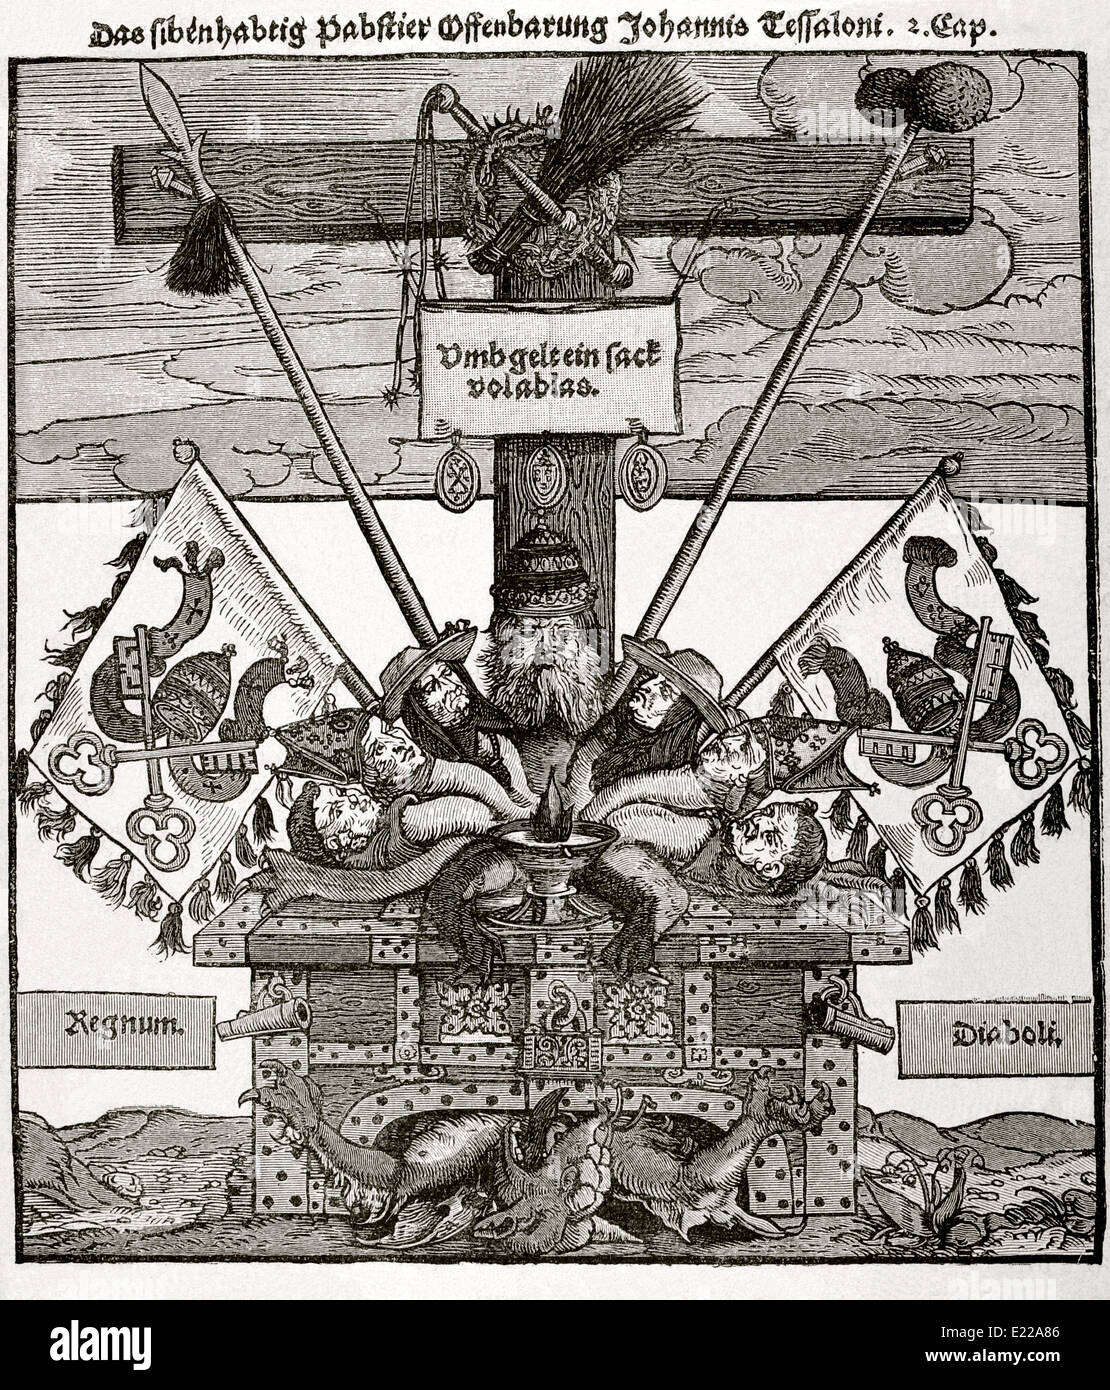 Protestant Reformation. 16th century. Germany. Lutheran satirical print against the sale of indulgences by the papacy. Stock Photo